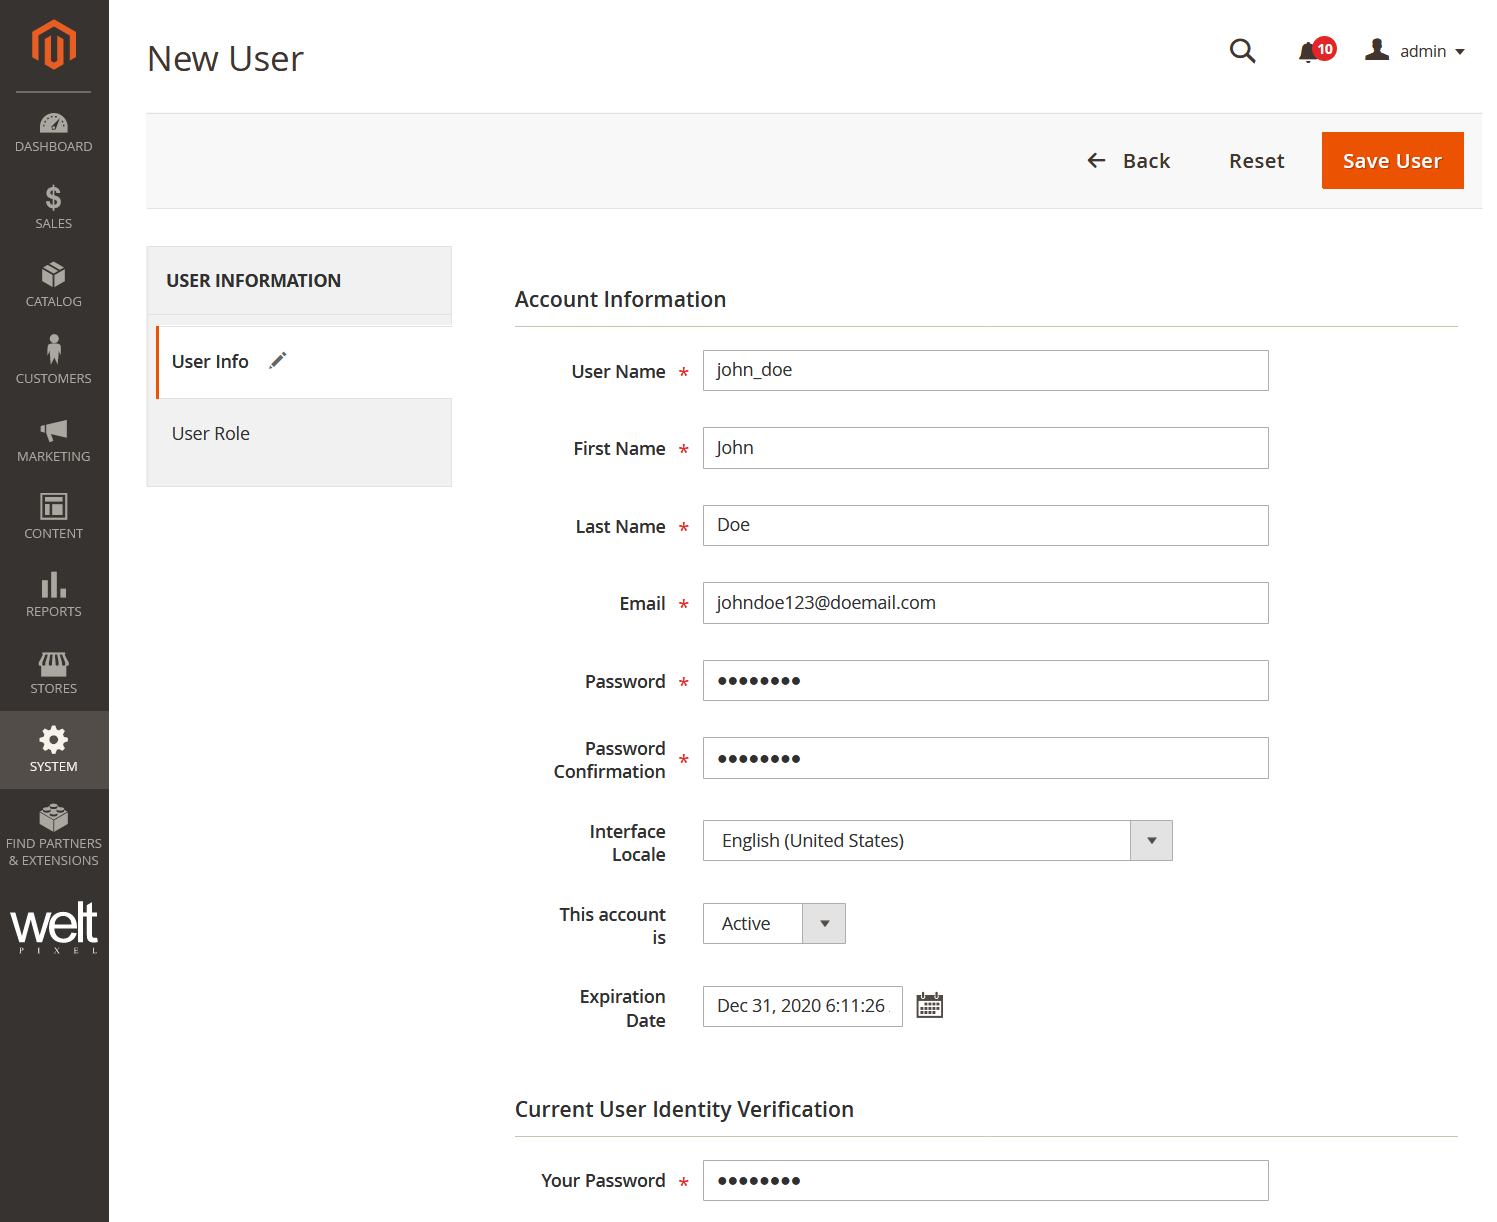 Screenshot_2020-12-08_New_User_Users_Permissions_System_Magento_Admin.png